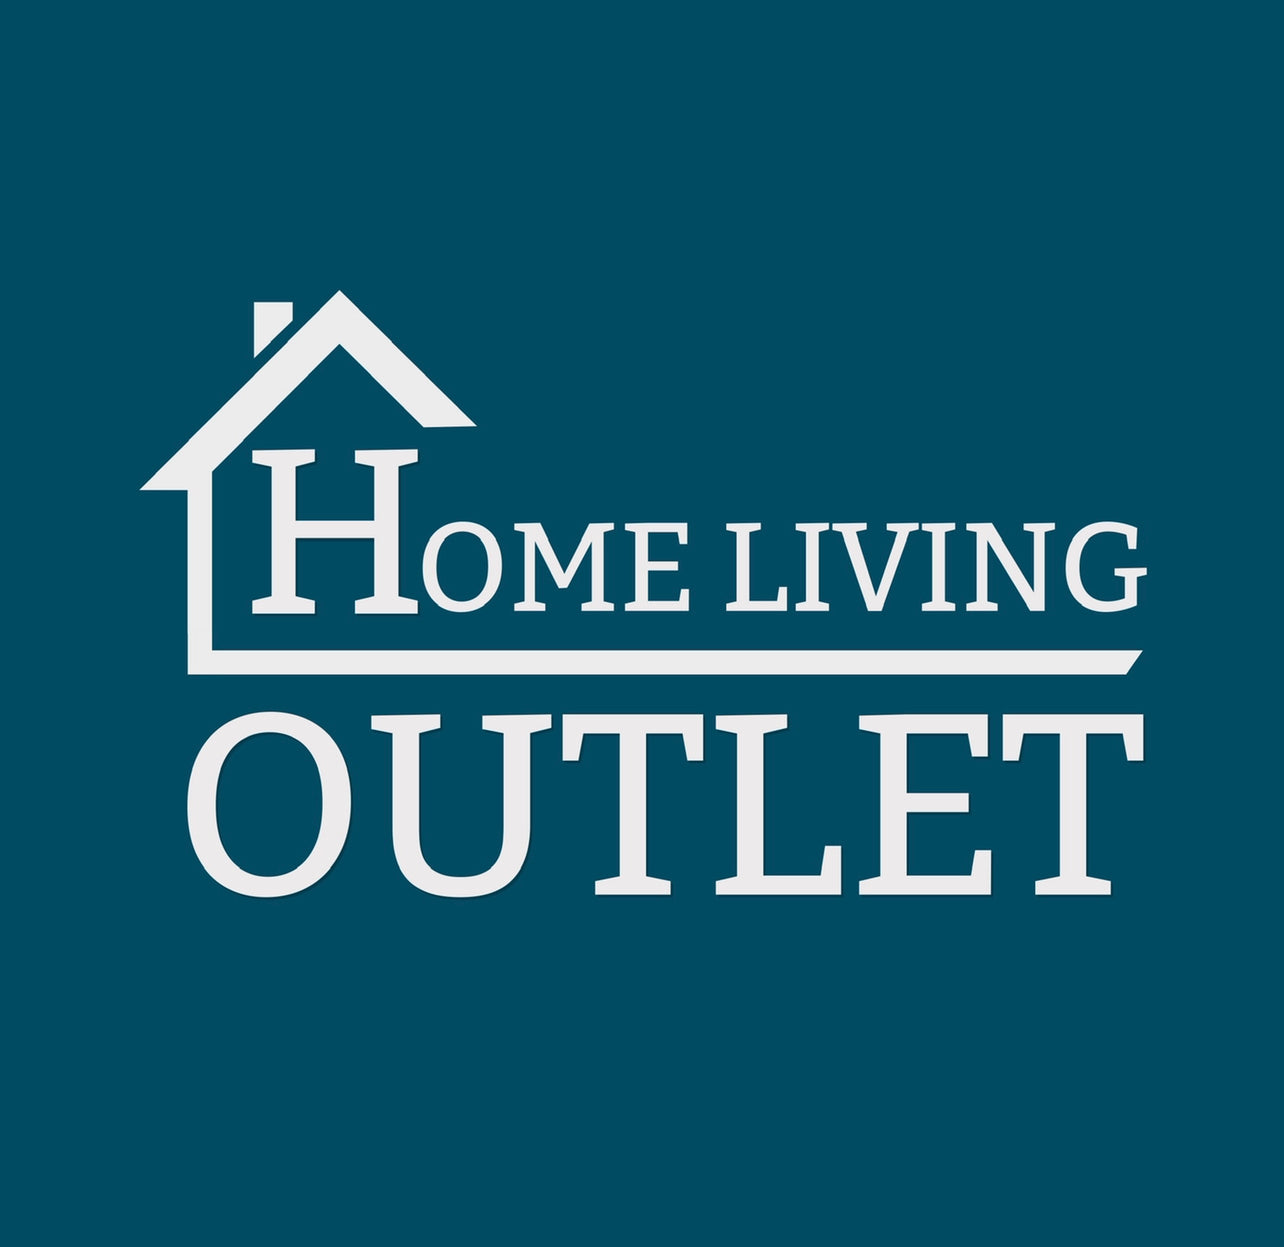 Home Living Outlet Logo - Discounted Sofas, Chair, Footstools & More